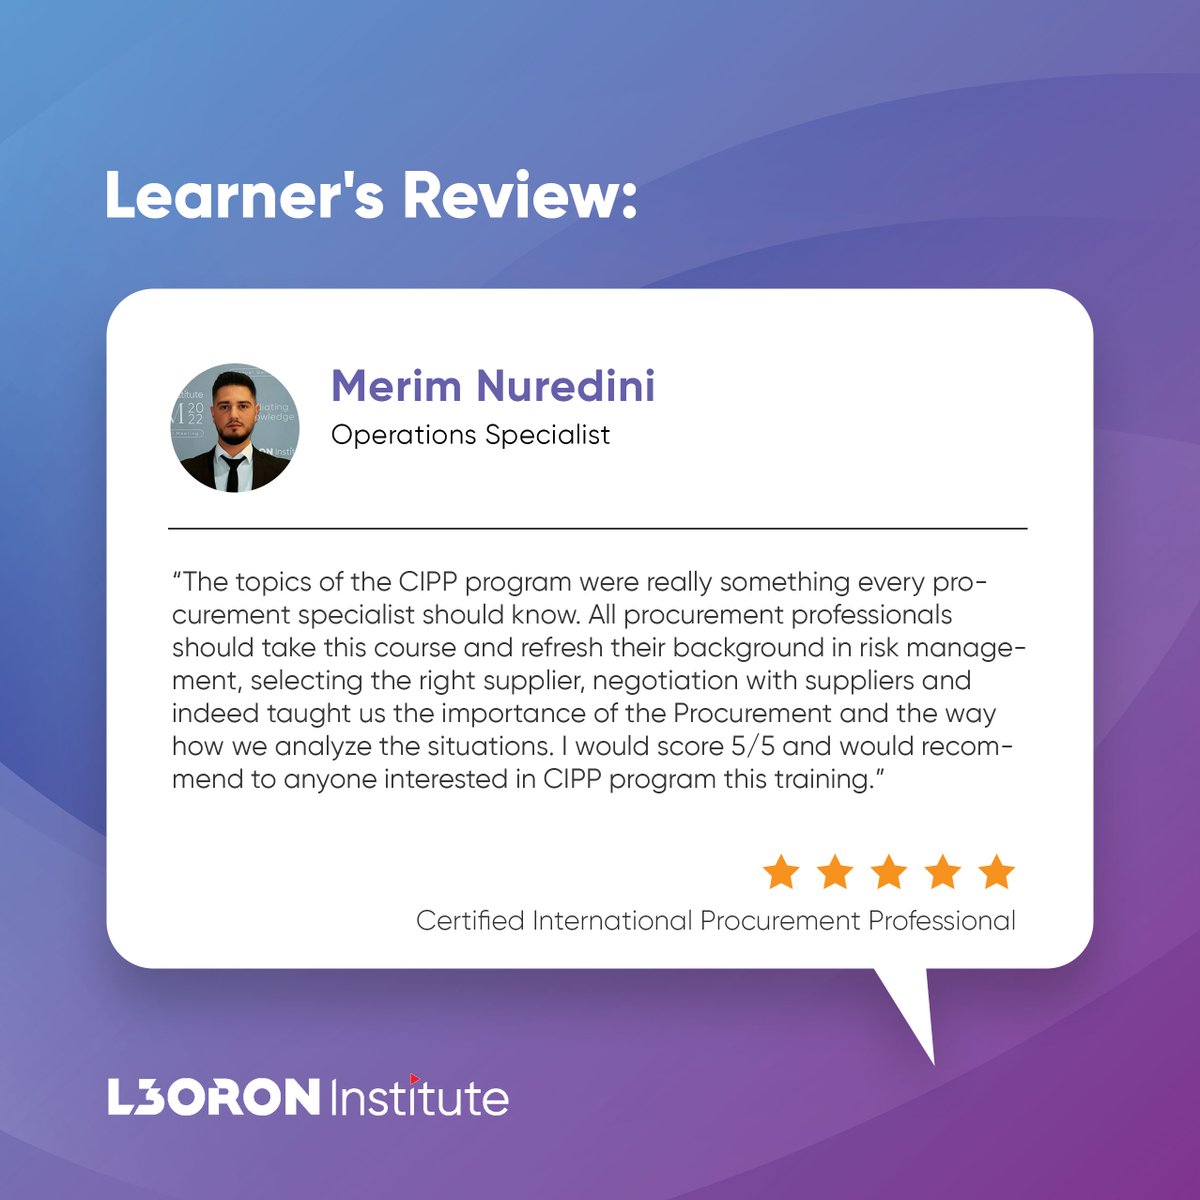 Hats off to the exceptional participants of the CIPP - Certified International Procurement Professional Course! 🎓

We look forward to witnessing your continued success! 

#LearnersReview #LEORONInstitute #CIPP #ProcurementExcellence #SuccessStories #Testimonial #l3rn